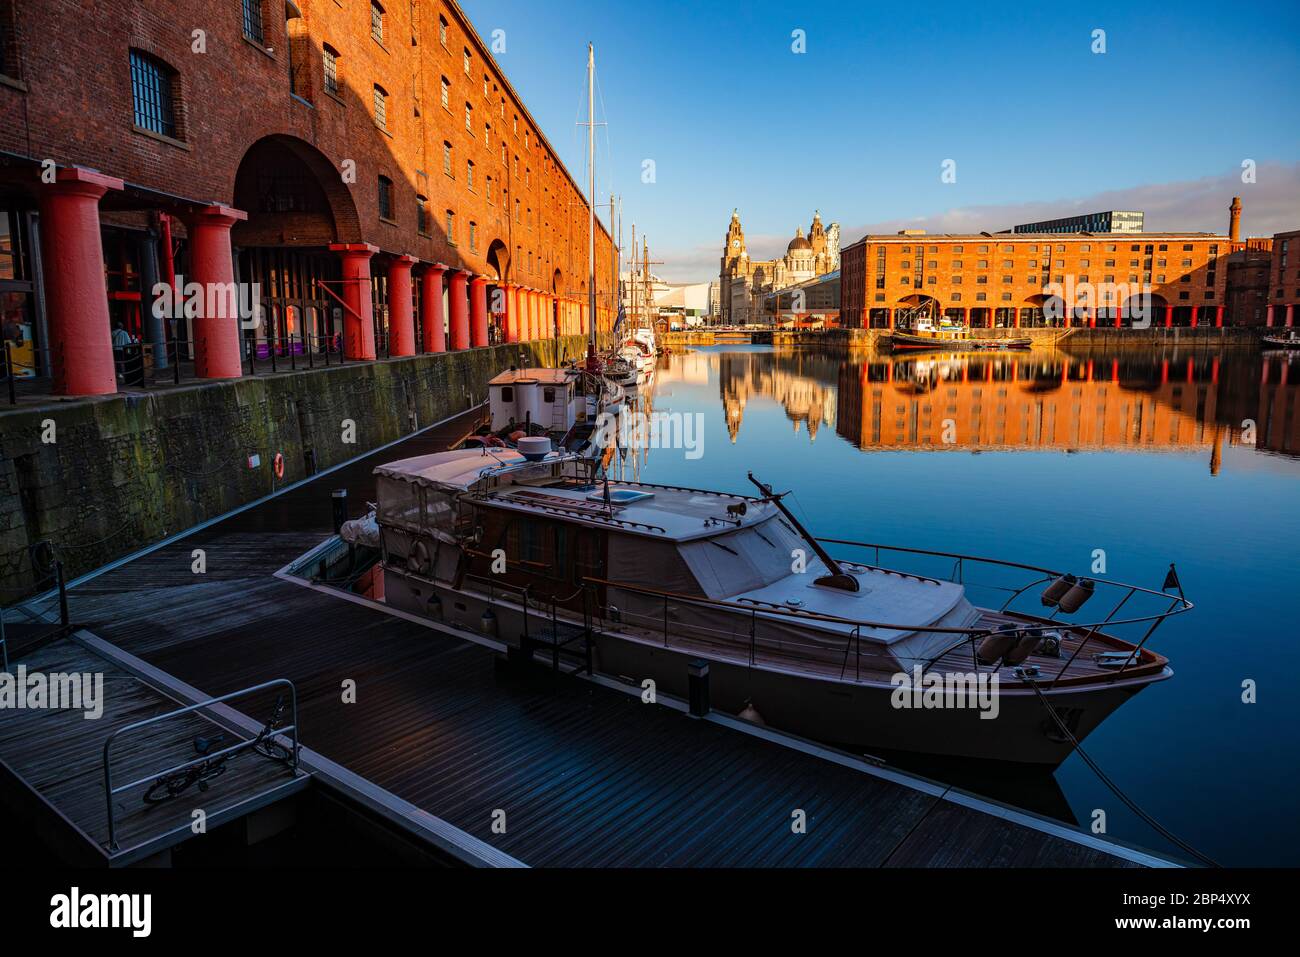 Royal Albert Dock with historical buildings in England, United Kingdom. Stock Photo